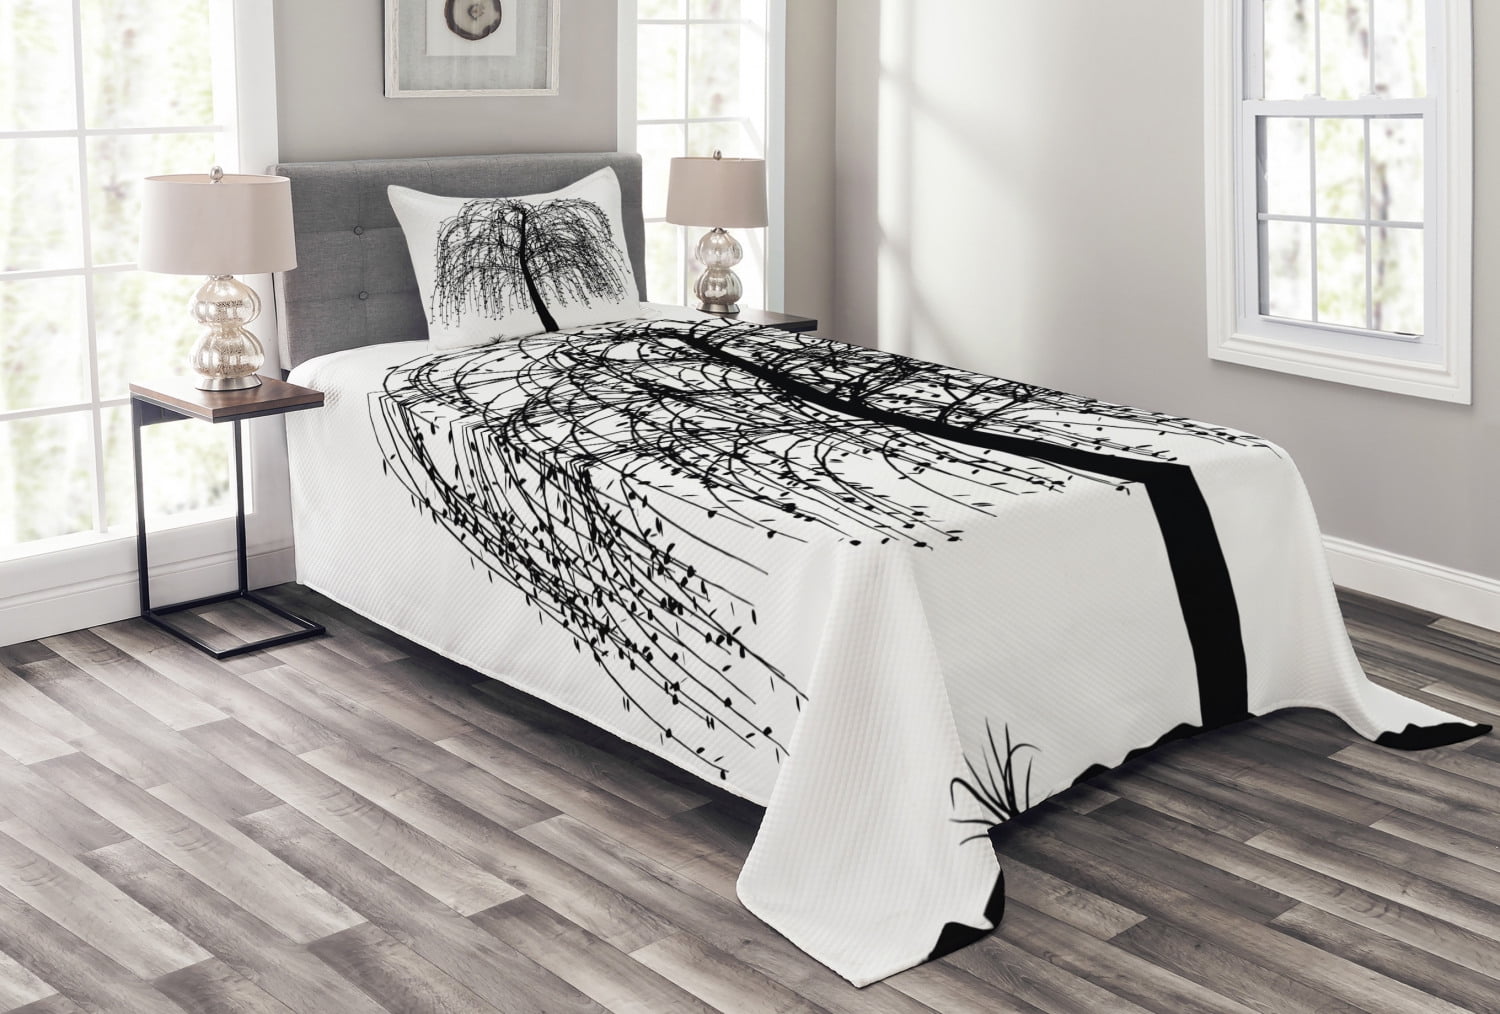 Luxury Comforter Cover Bedspread Pillow Cases with Zipper Closure for Children Adult Macro Leafless Tree Branches Idyllic Twigs of Oak Nature Print Black White 4 Piece Bedding Set California King 